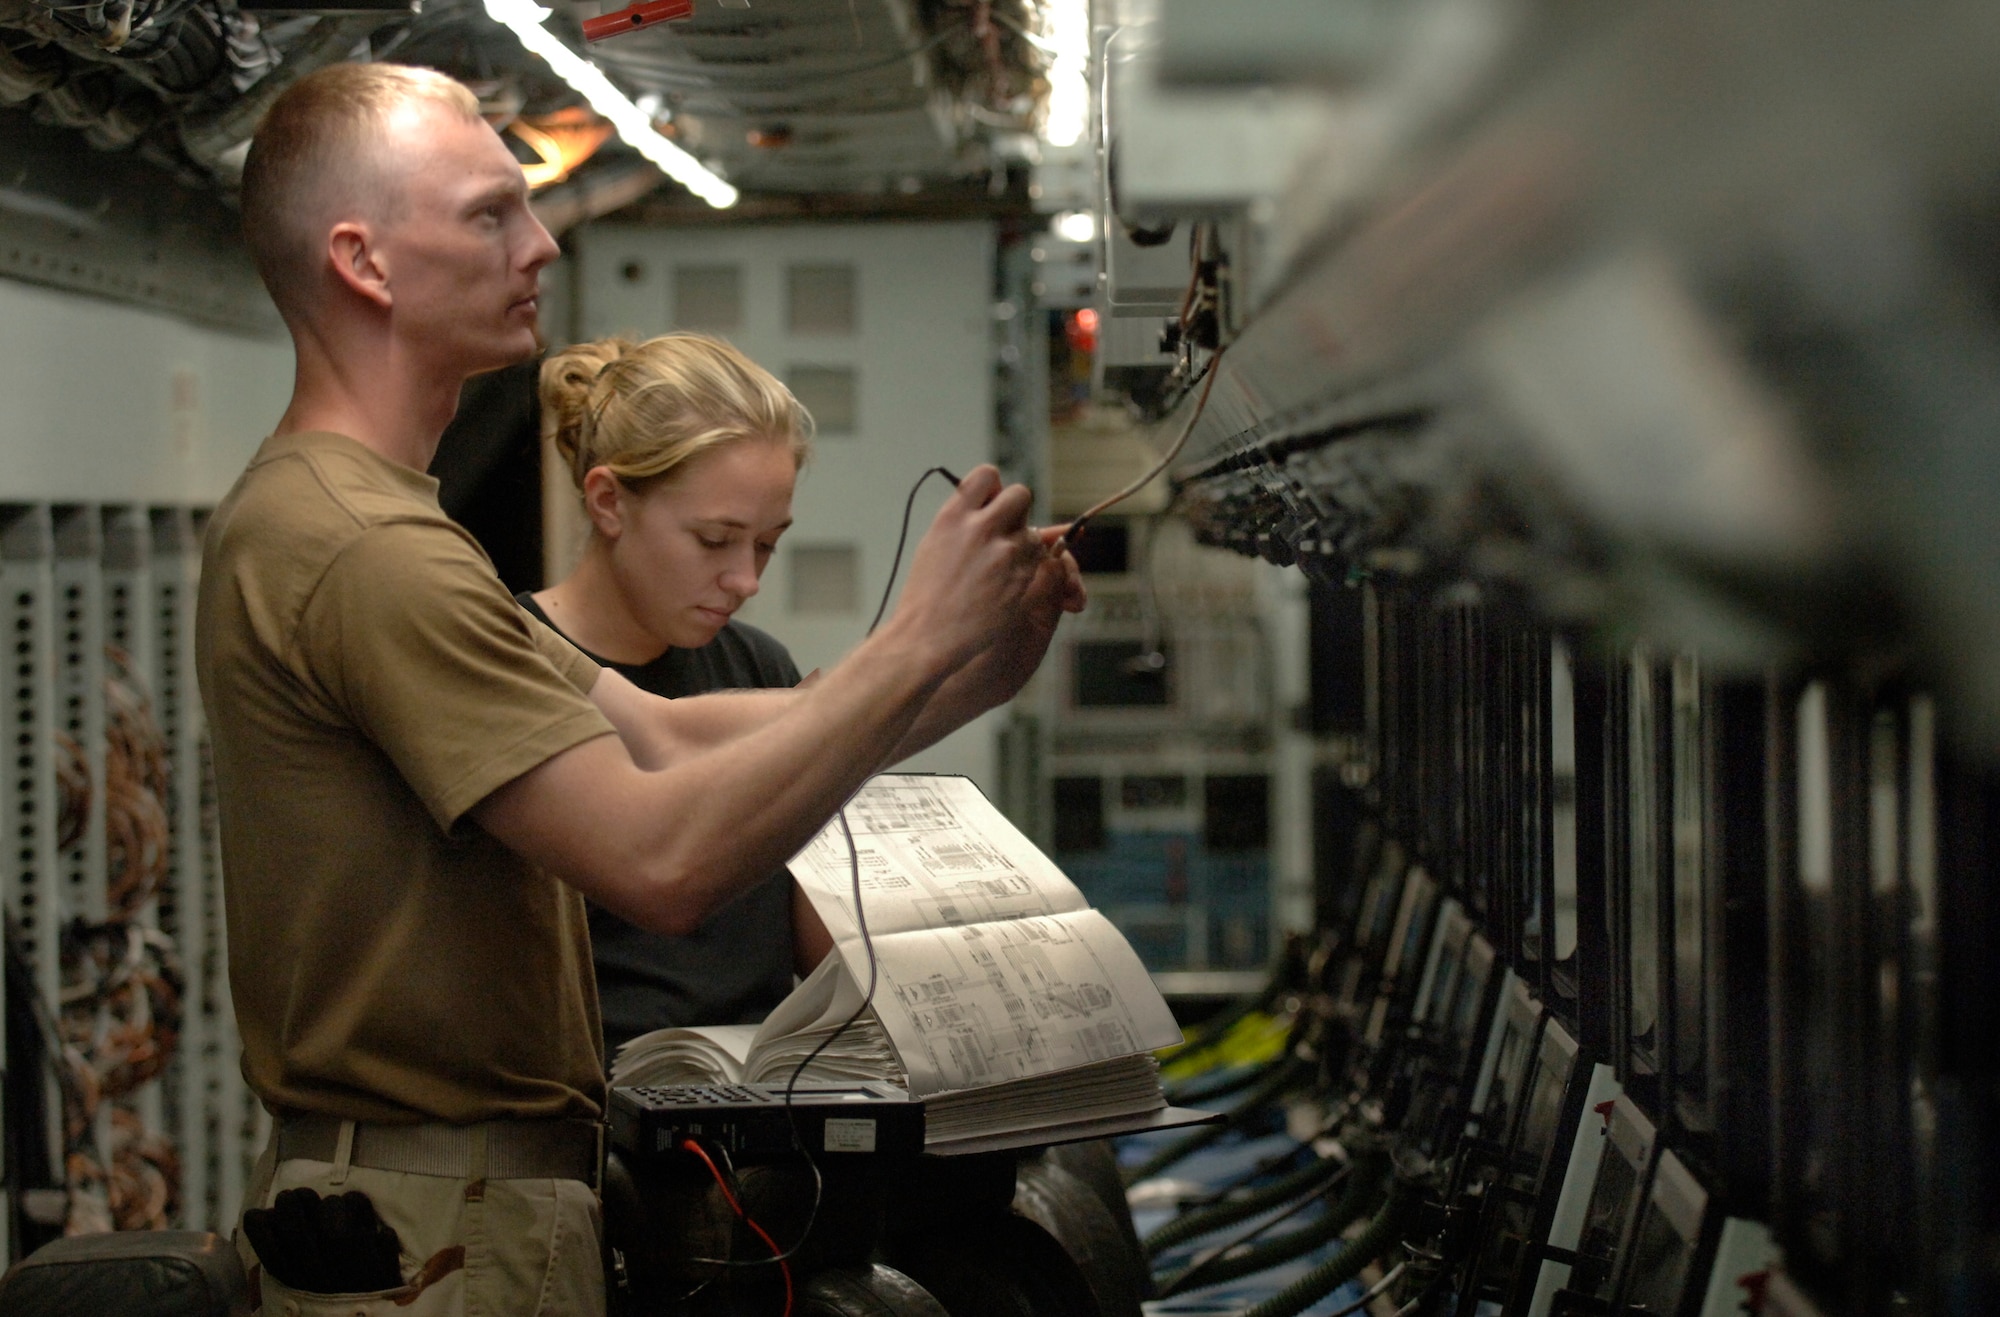 Senior Airman Dennis Kidwell and Airman 1st Class Ami Grabowski troubleshoot a bad radio frequency line aboard an RC-135 Rivet Joint at a forward-deployed location in Southwest Asia. Both are electronic warfare specialists. Airman Kidwell is deployed from the 488th Intelligence Squadron, Royal Air Force Mildenhall, England, and Airman Grabowski is from the 97th Intelligence Squadron from Offutt Air Force Base, Neb.  (U.S. Air Force photo/Master Sgt. Scott Wagers)